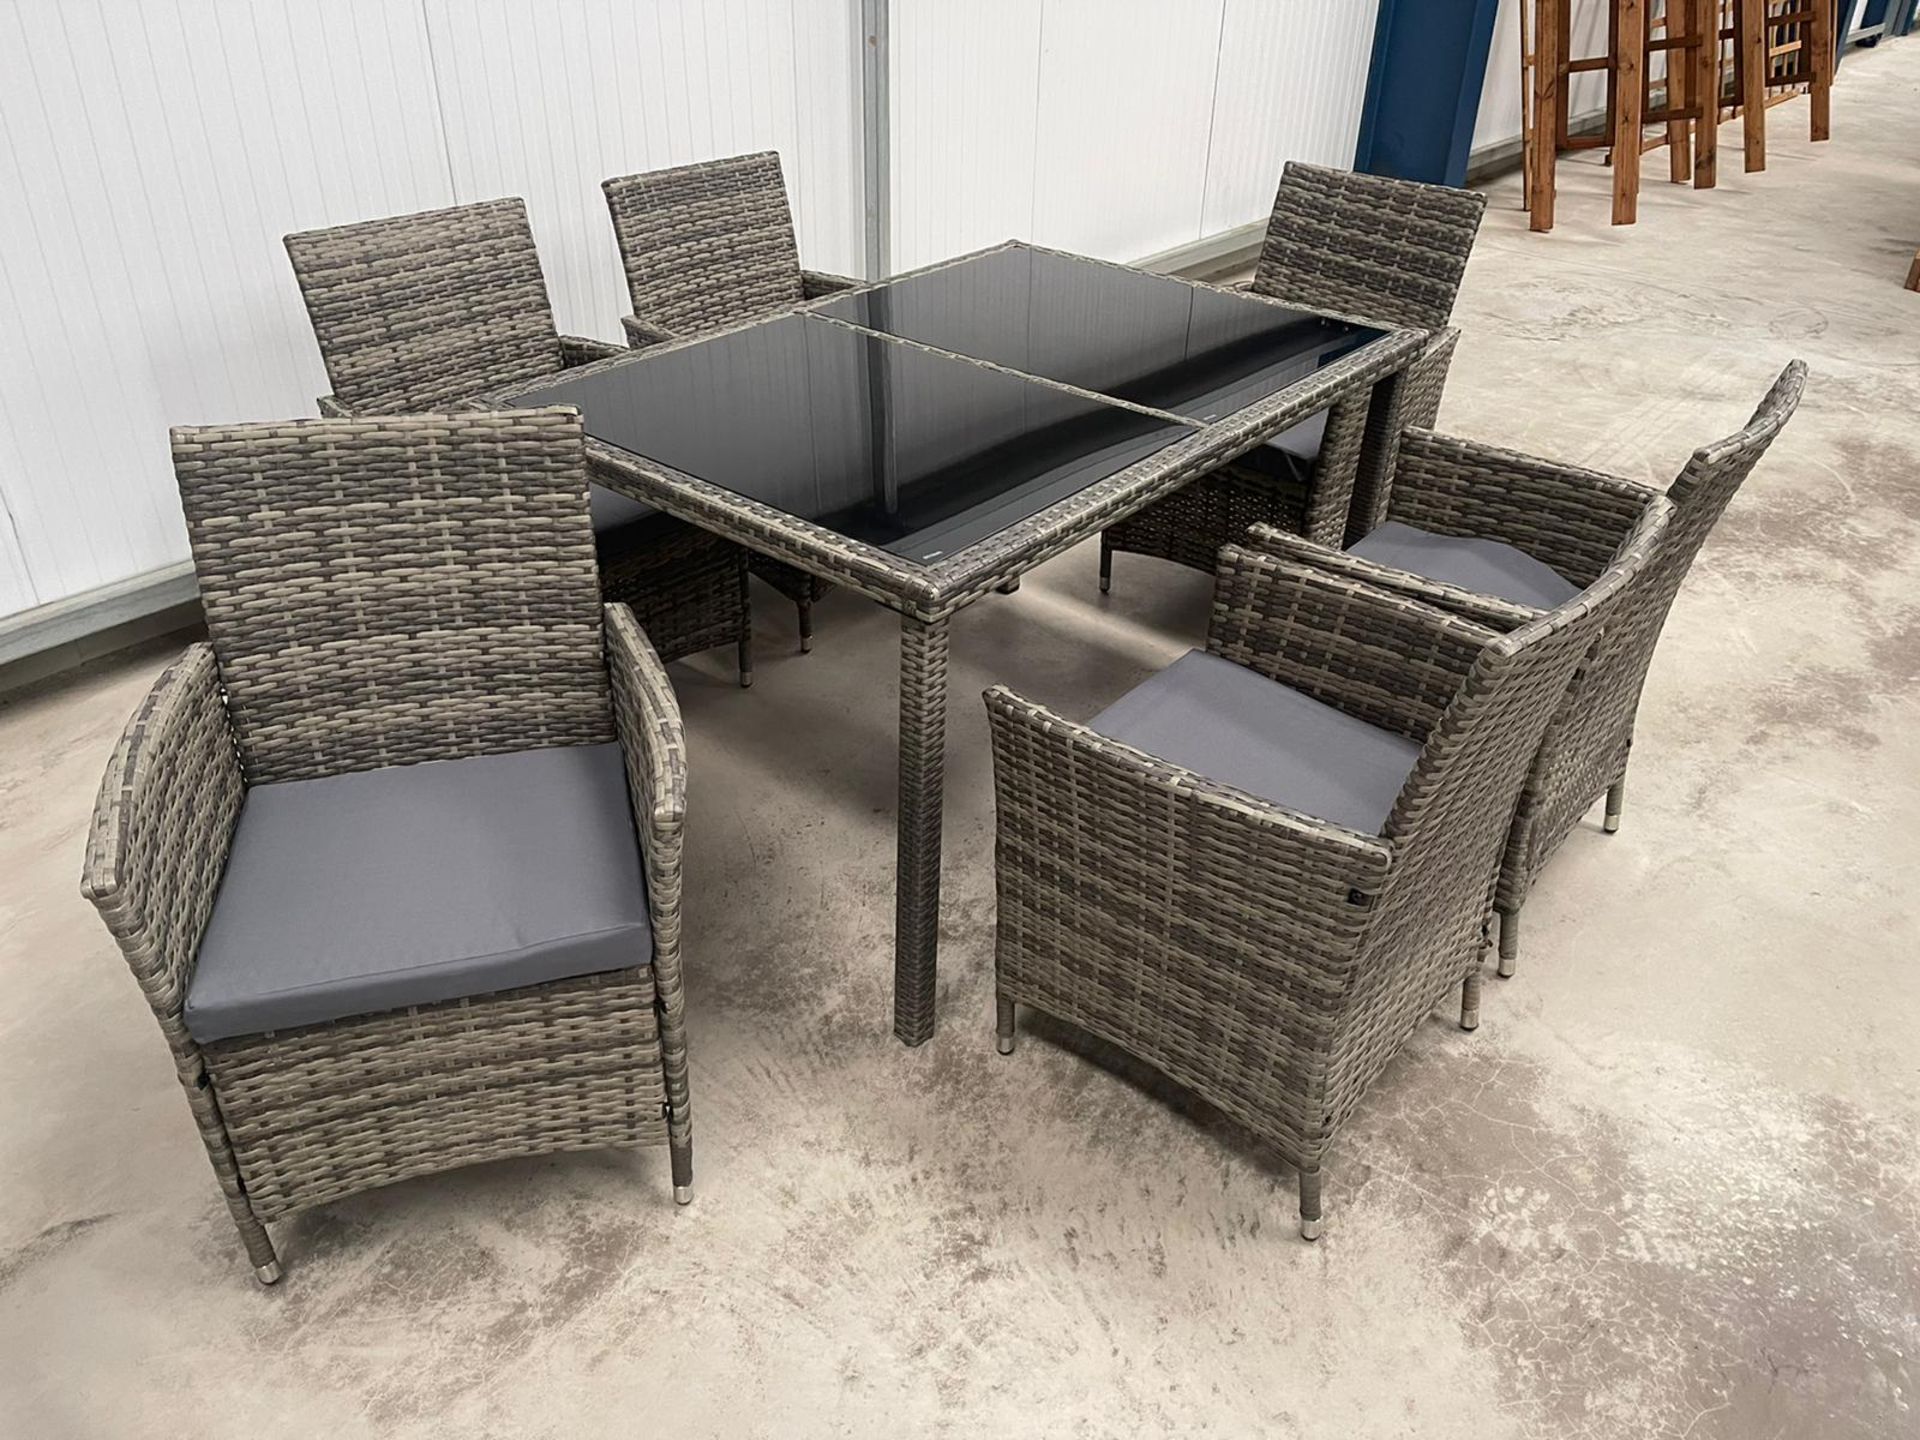 RRP £999 - NEW GREY SIX SEAT DINING SET WITH SIX CHAIRS - LUXURY BLACK GLASS TOPPED DINING TABLE - Image 3 of 5